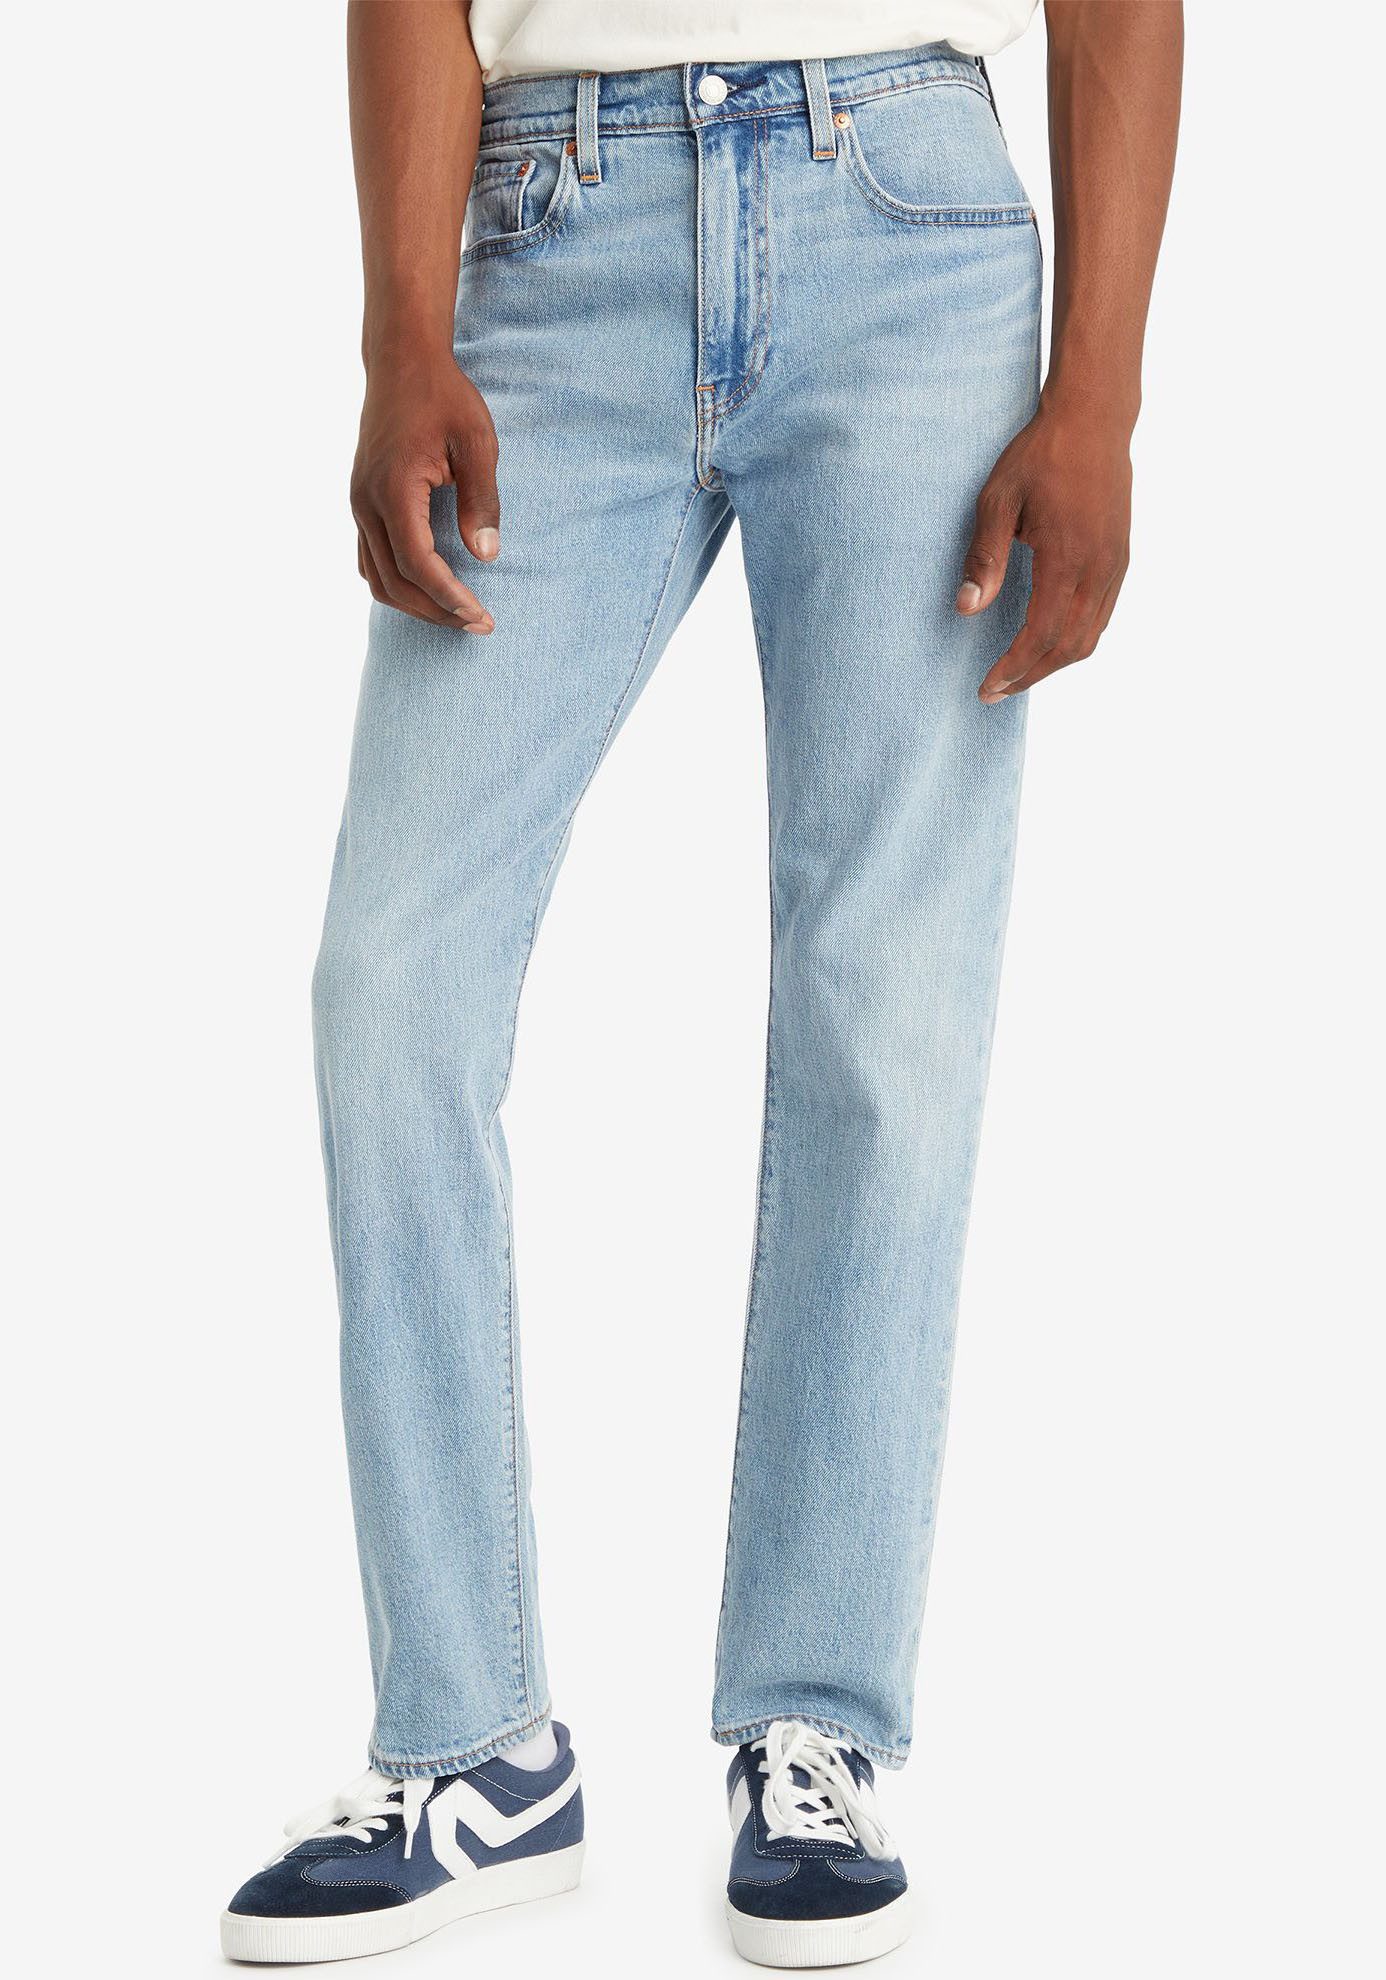 Levi's Straight lef jeans in 5-pocketmodel model '502 CALL IT OFF'